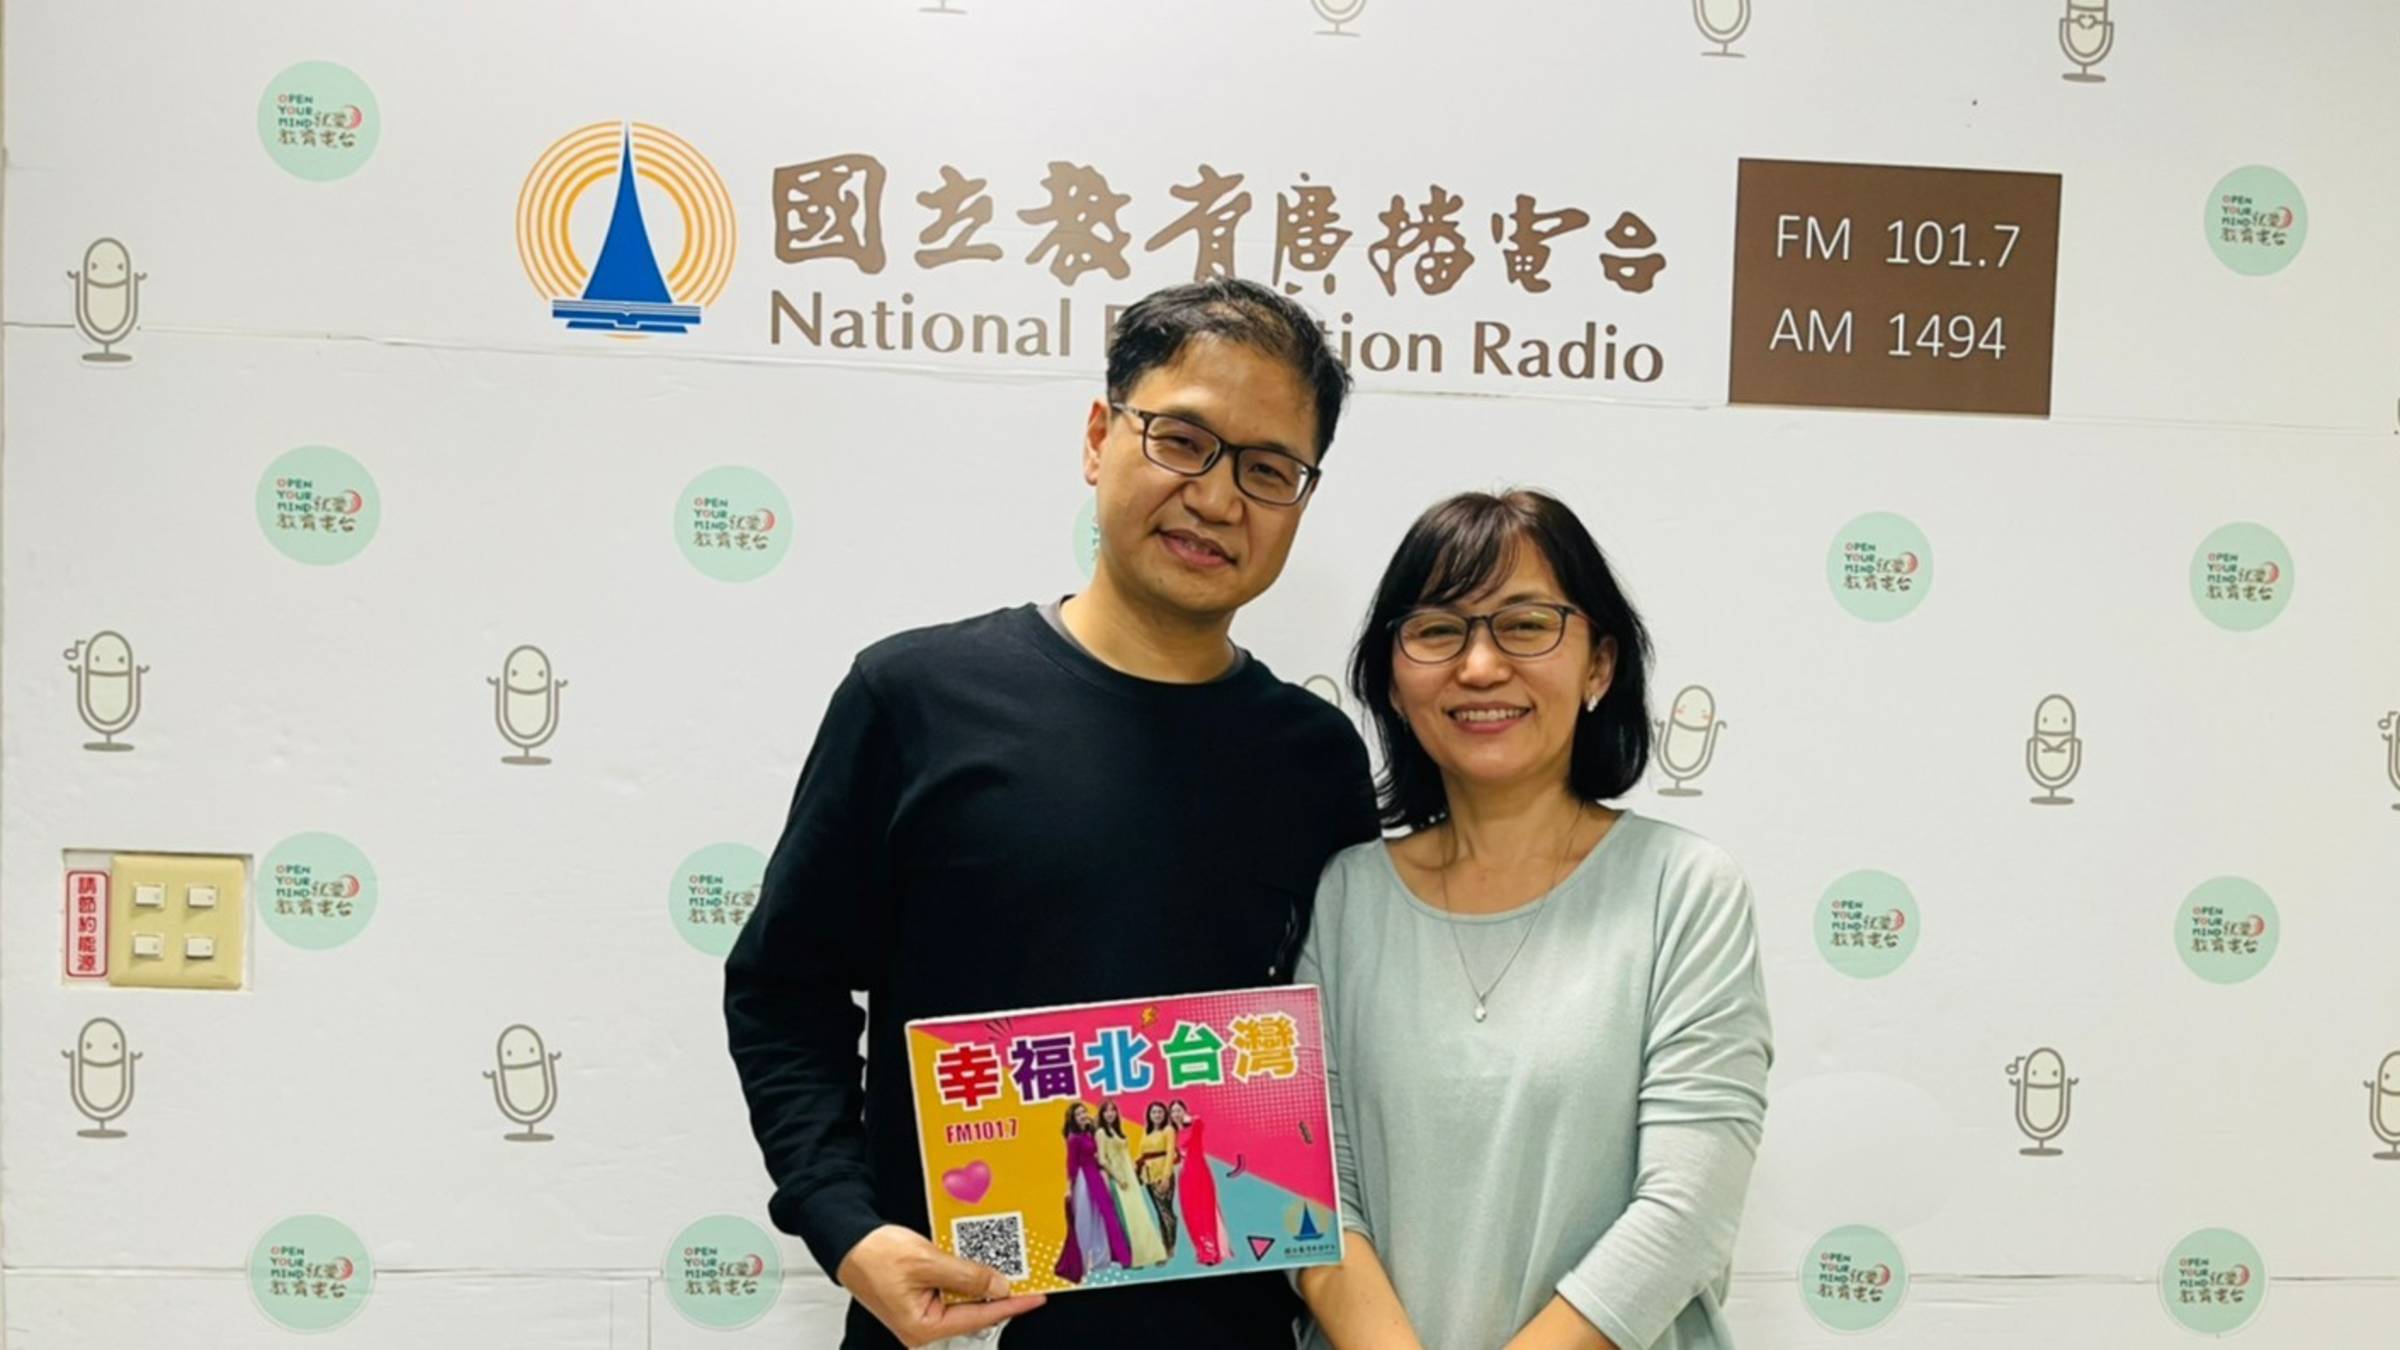  Mongolian immigrant Jin En Xi and her Taiwanese husband Wu Ying Zhe. (Photo / Provided by the National Education Radio)